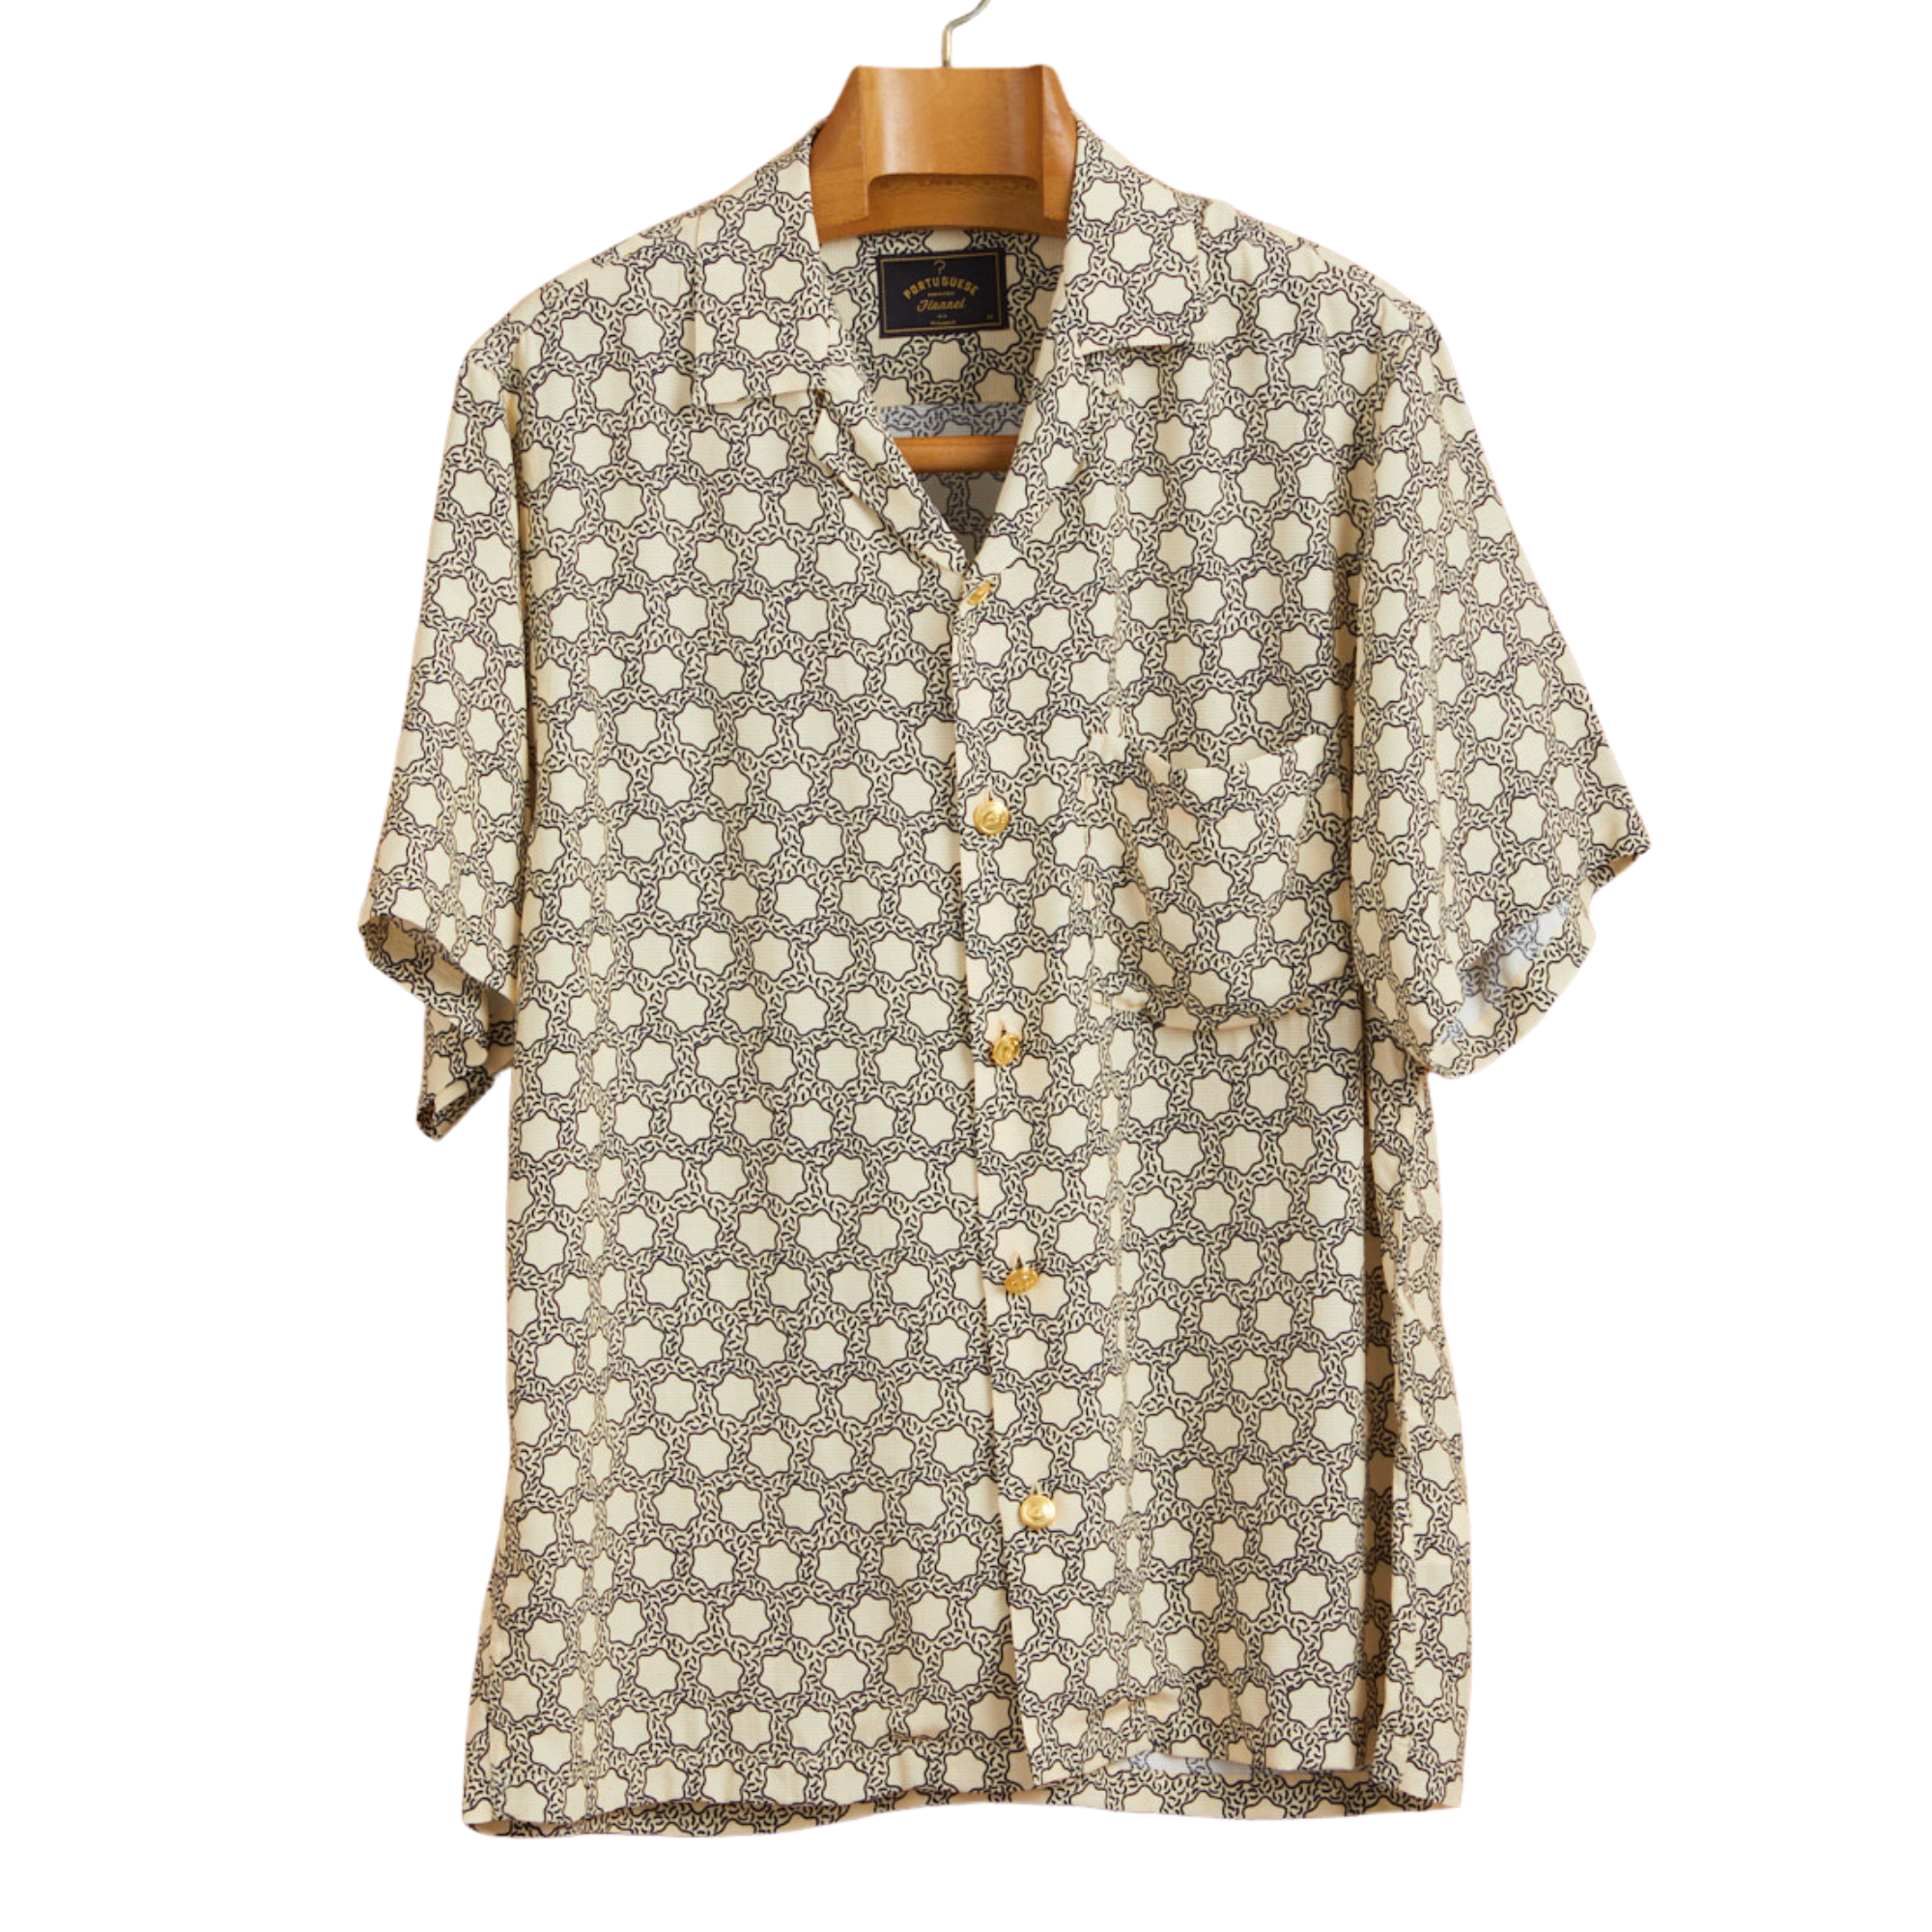 Portuguese Flannel Select Shirt in Beige